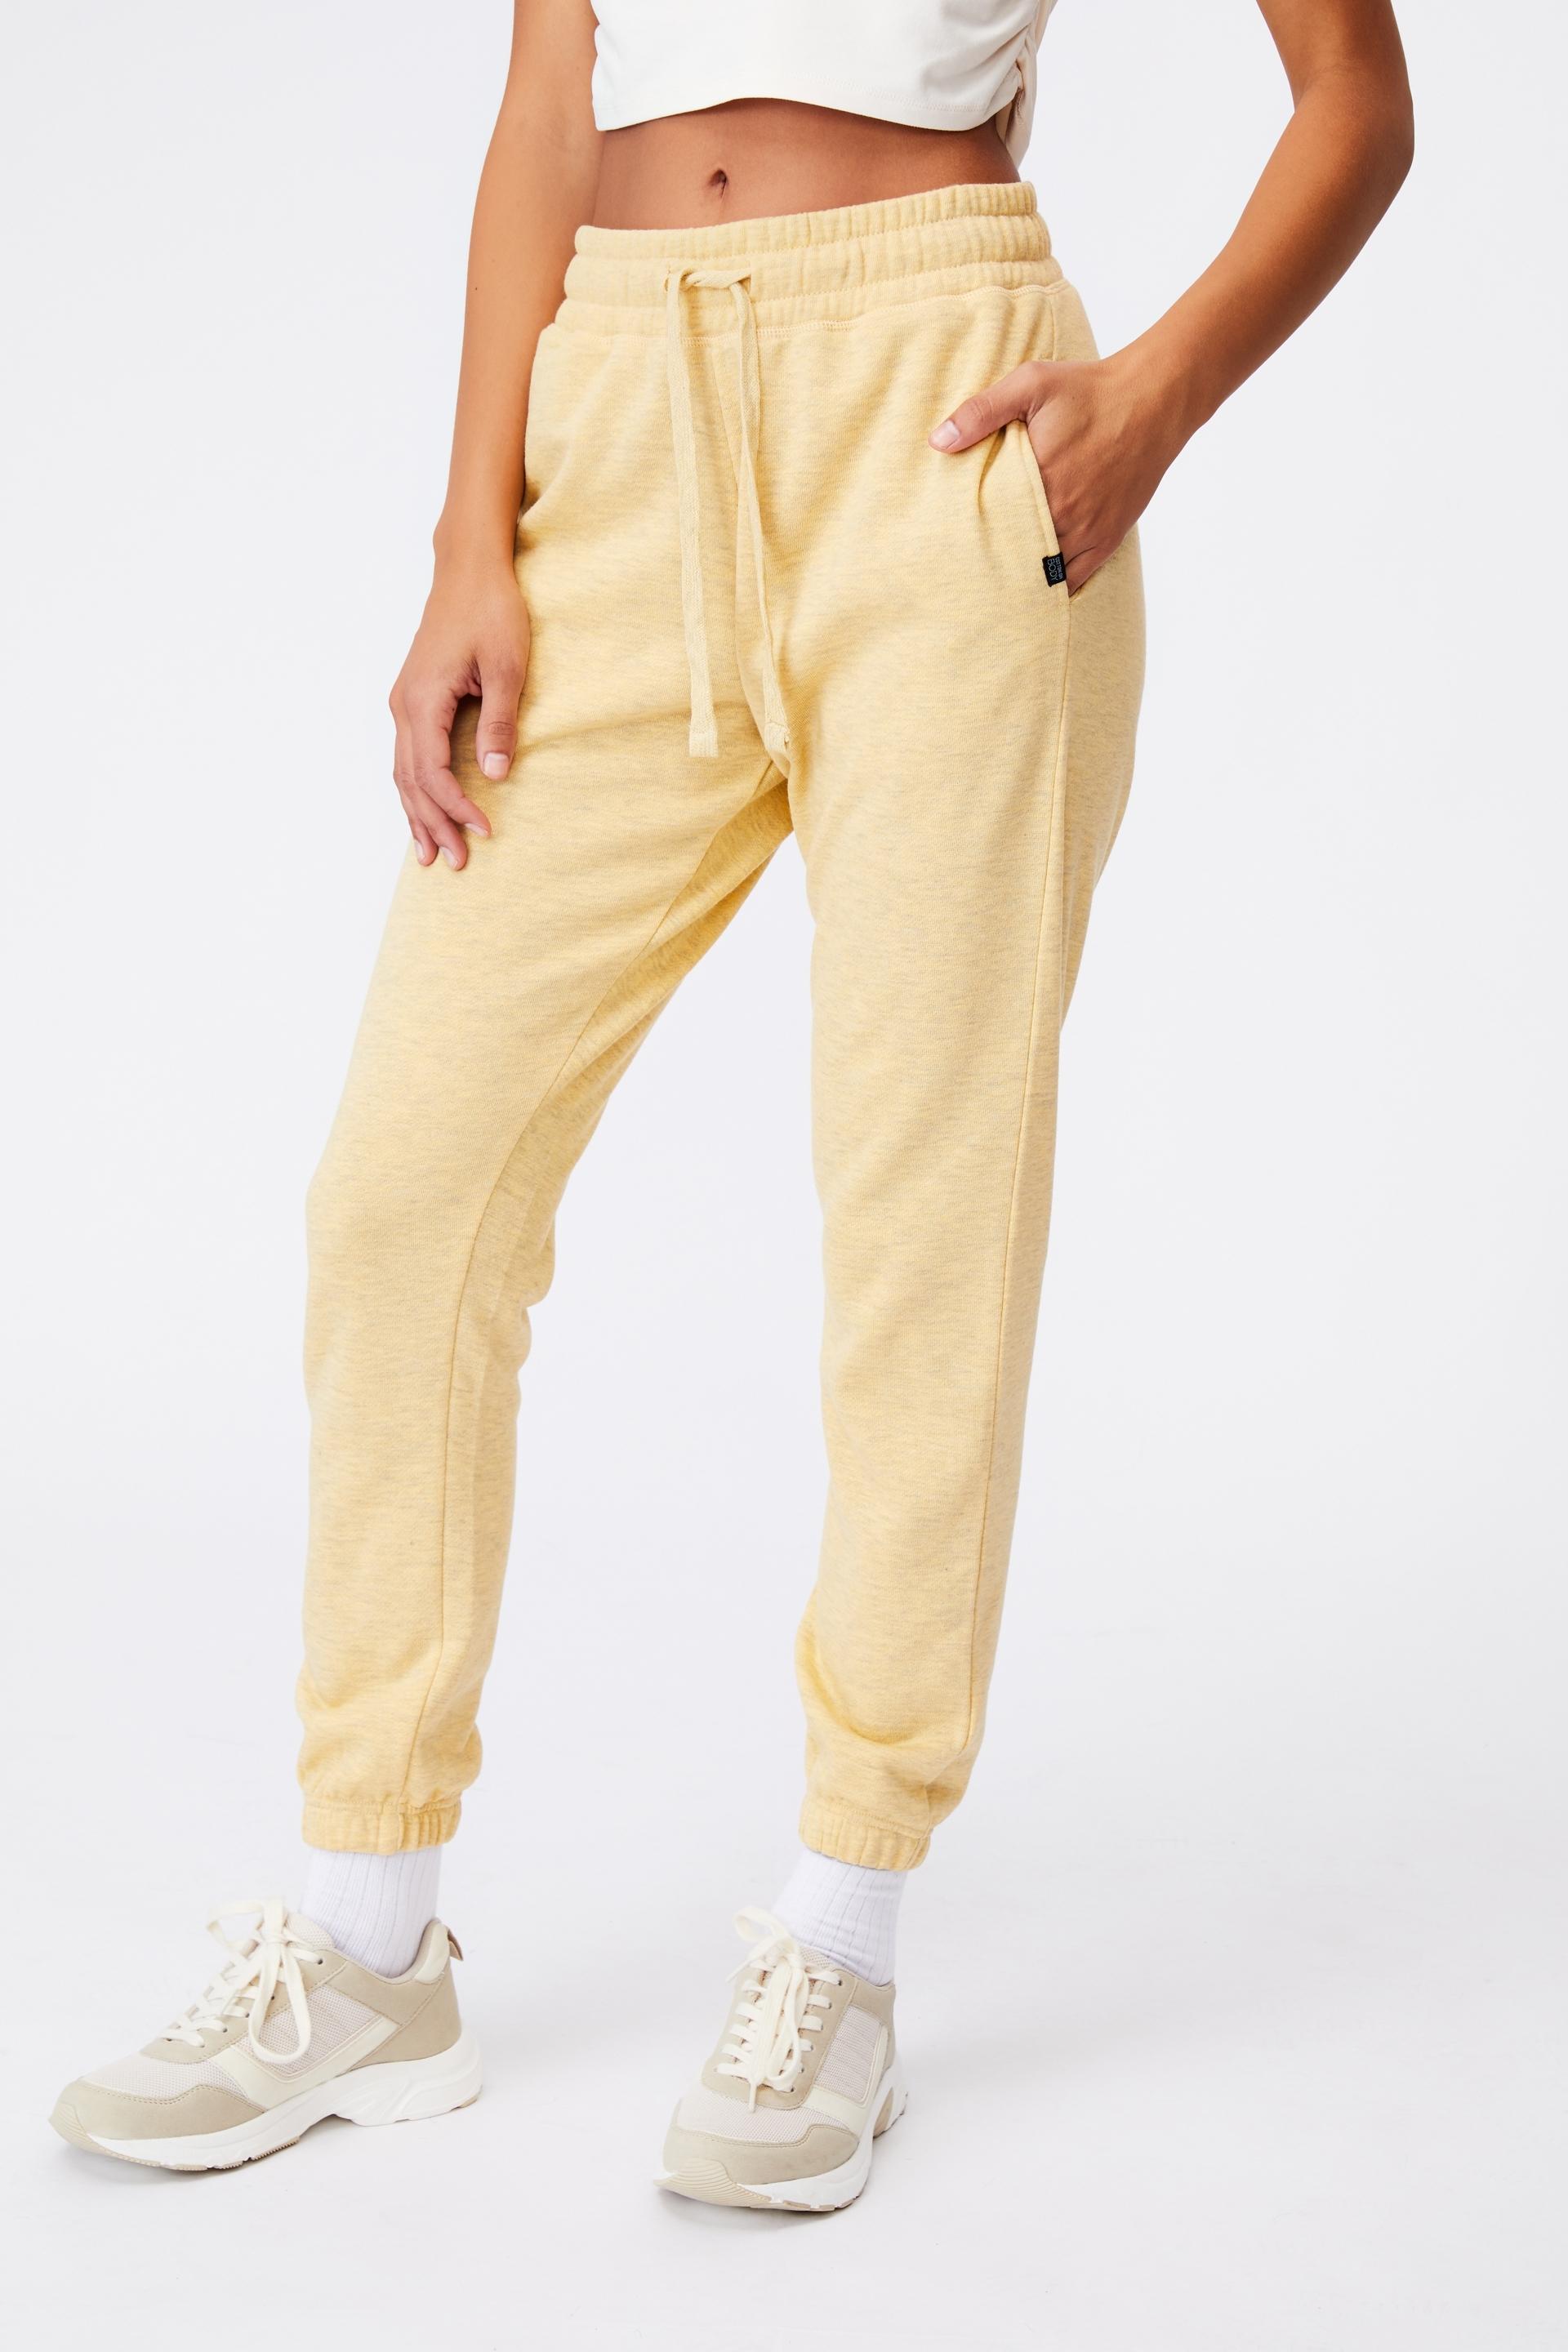 Lifestyle gym track pant - mellow yellow marle Cotton On Bottoms ...